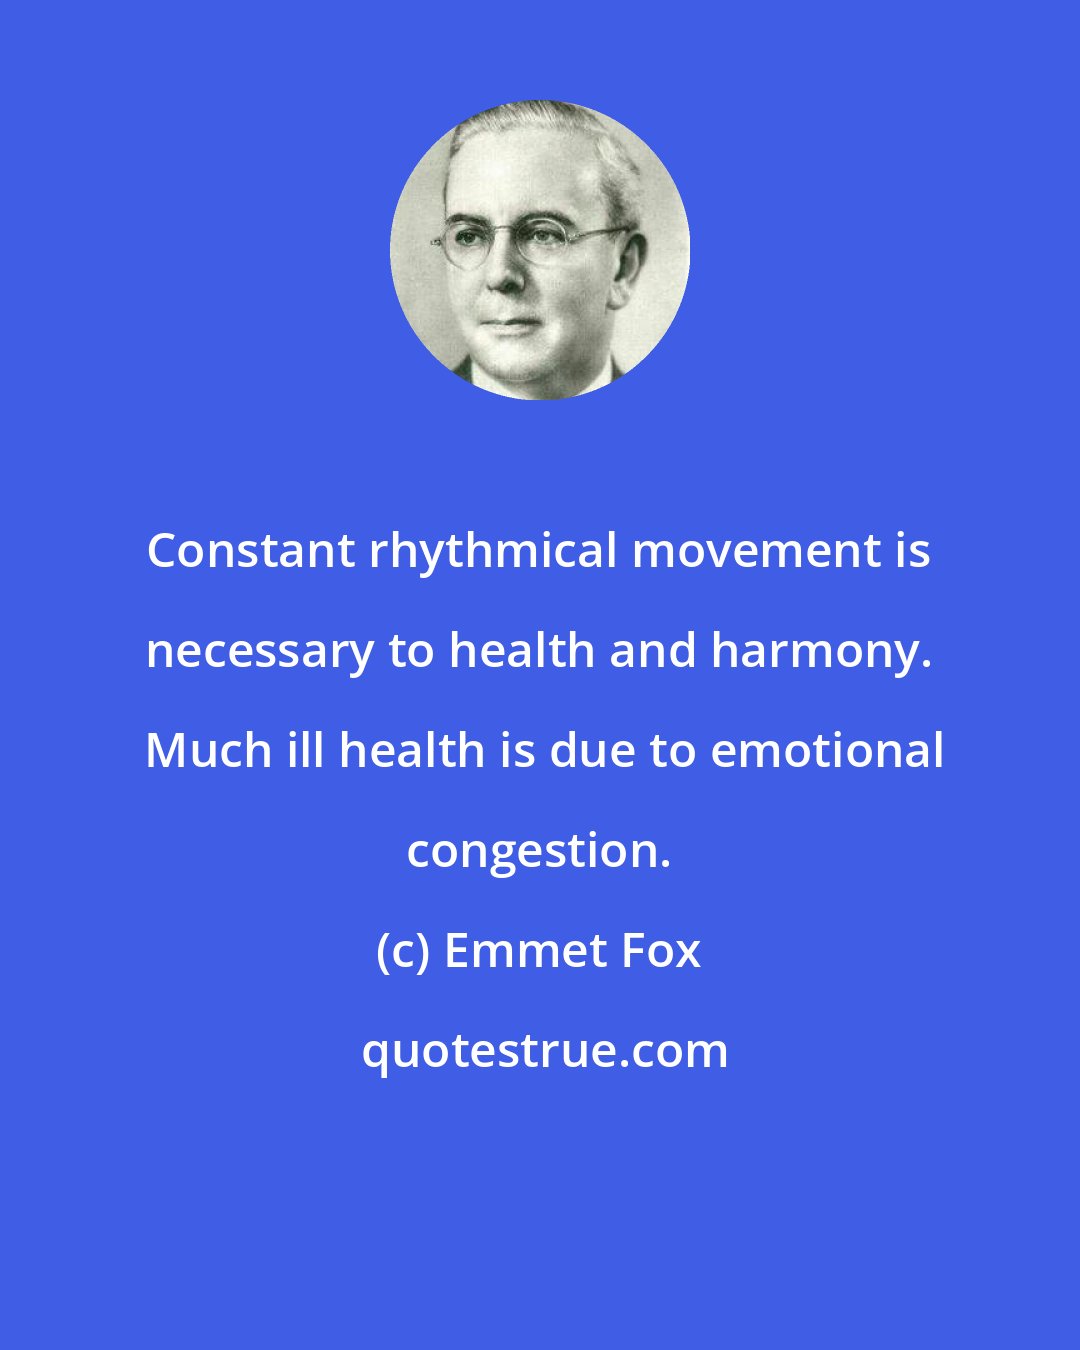 Emmet Fox: Constant rhythmical movement is necessary to health and harmony.  Much ill health is due to emotional congestion.